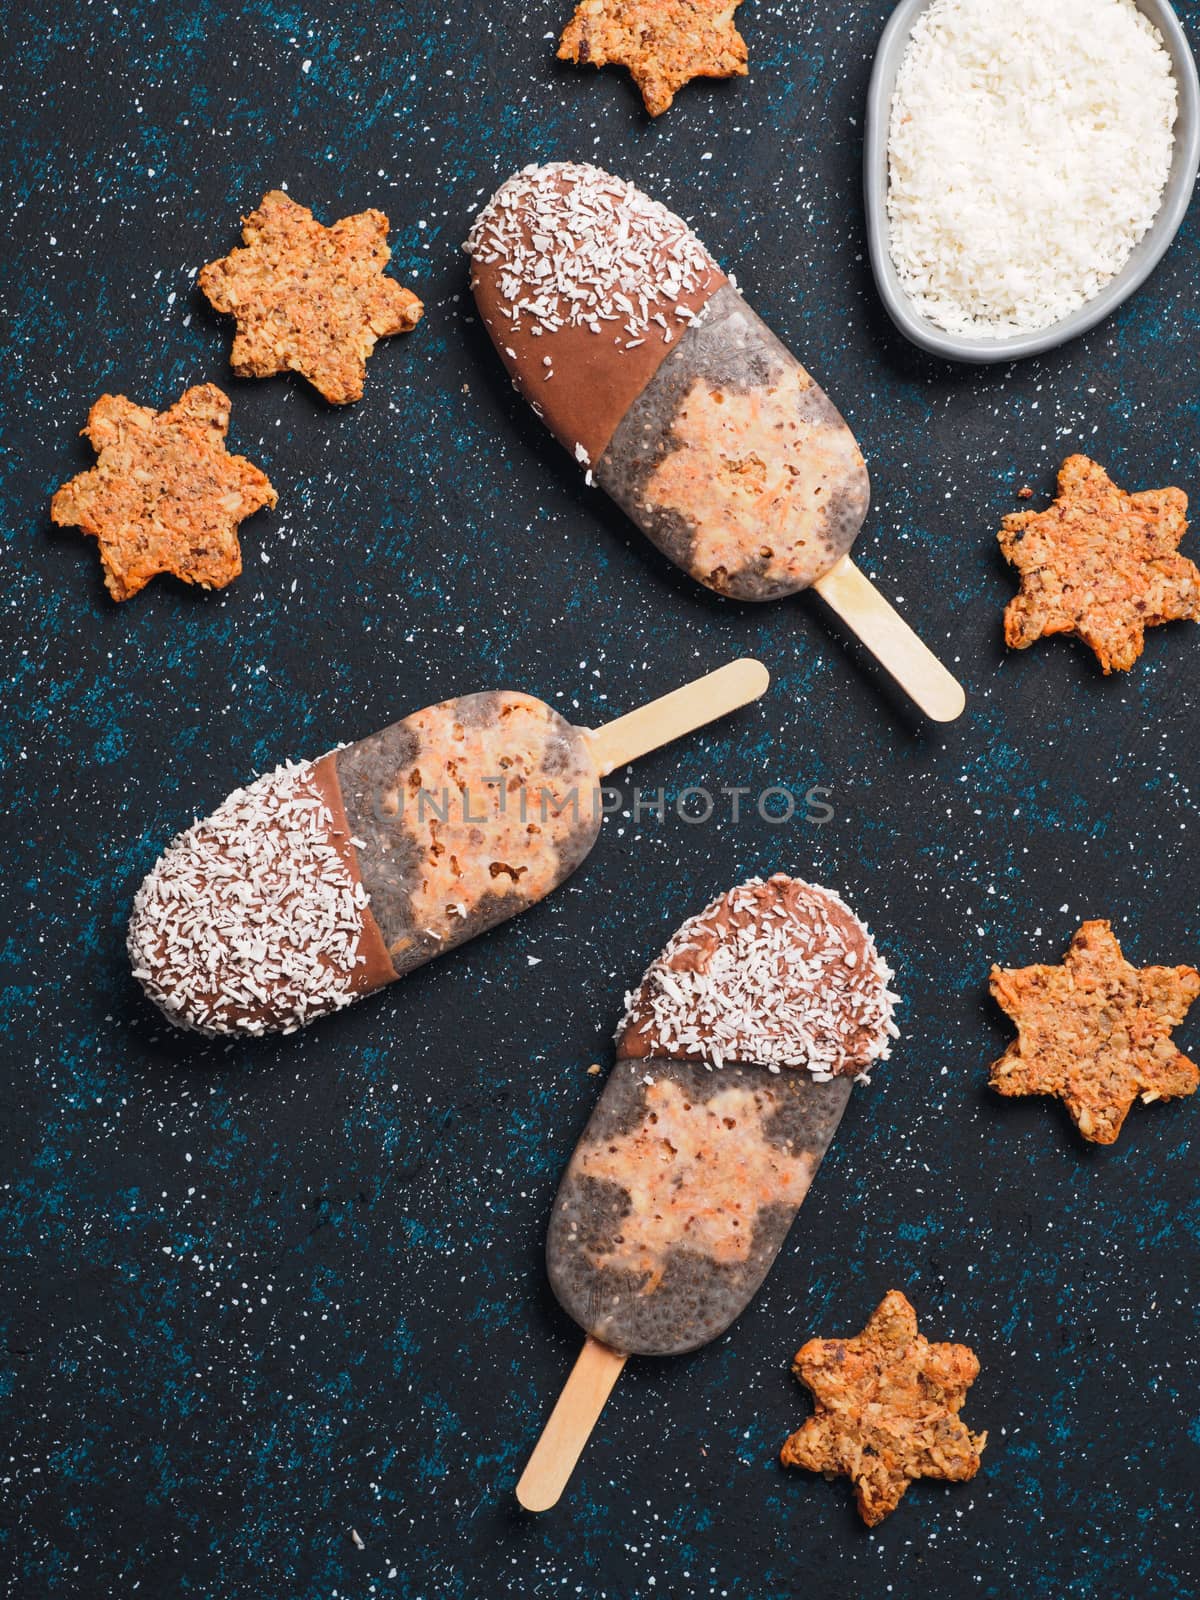 Chia popsicle with raw carrot cake and chocolate on dark blue background. Healthy recipe and idea homemade vegan popsicle ice cream. Easter dessert idea. Top view or flat-lay. Copy space for text.